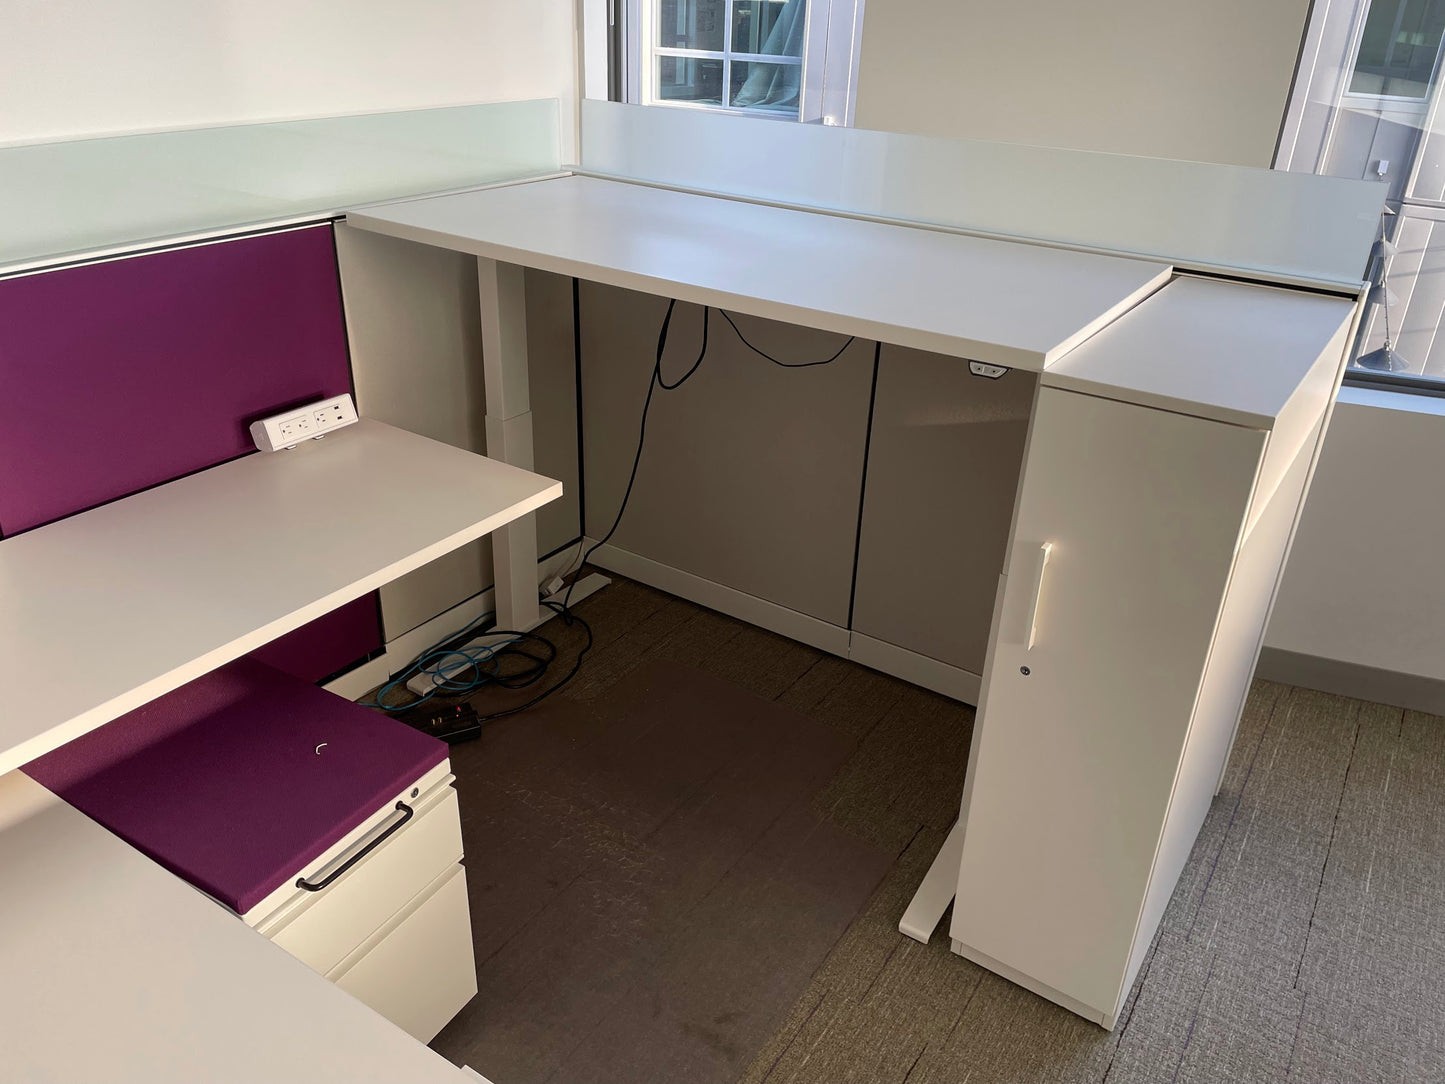 Picture of Herman miller canvas cubicle system with white and purple panels and sit stand desk